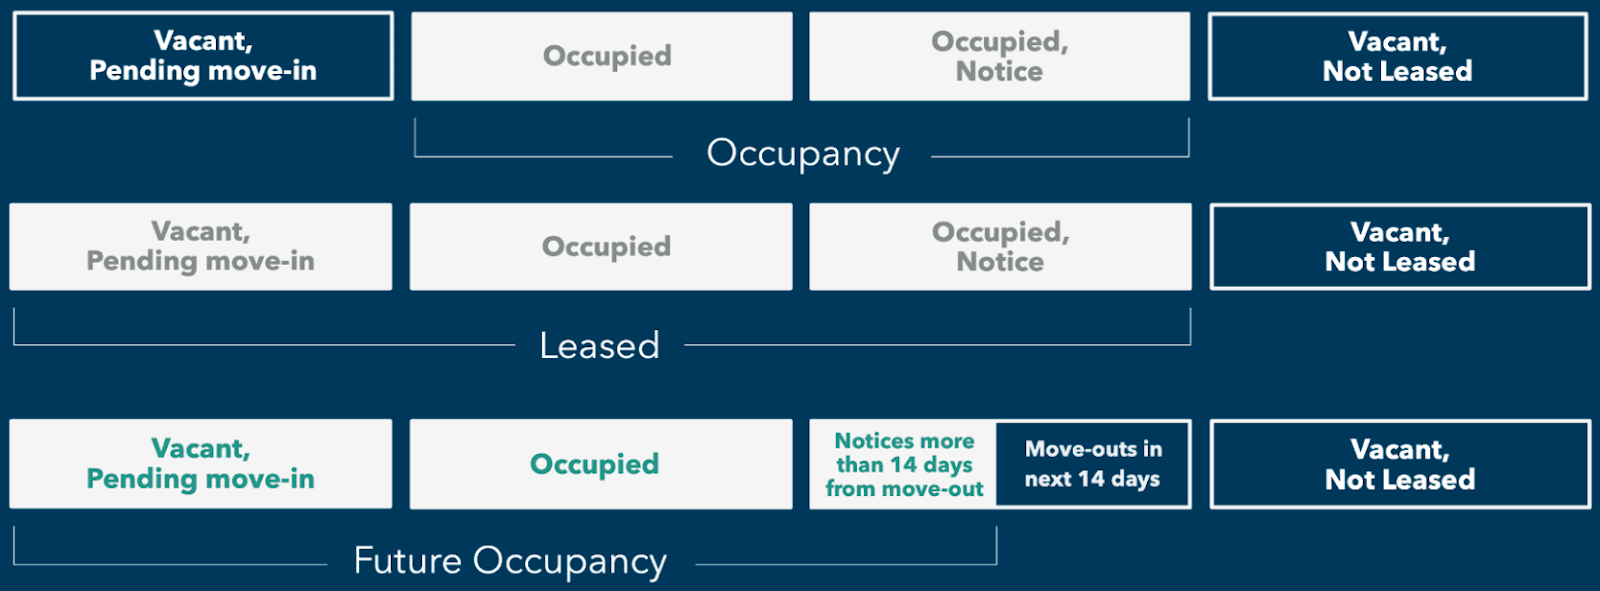 Comparison of Future Occupancy versus occupancy and leased.